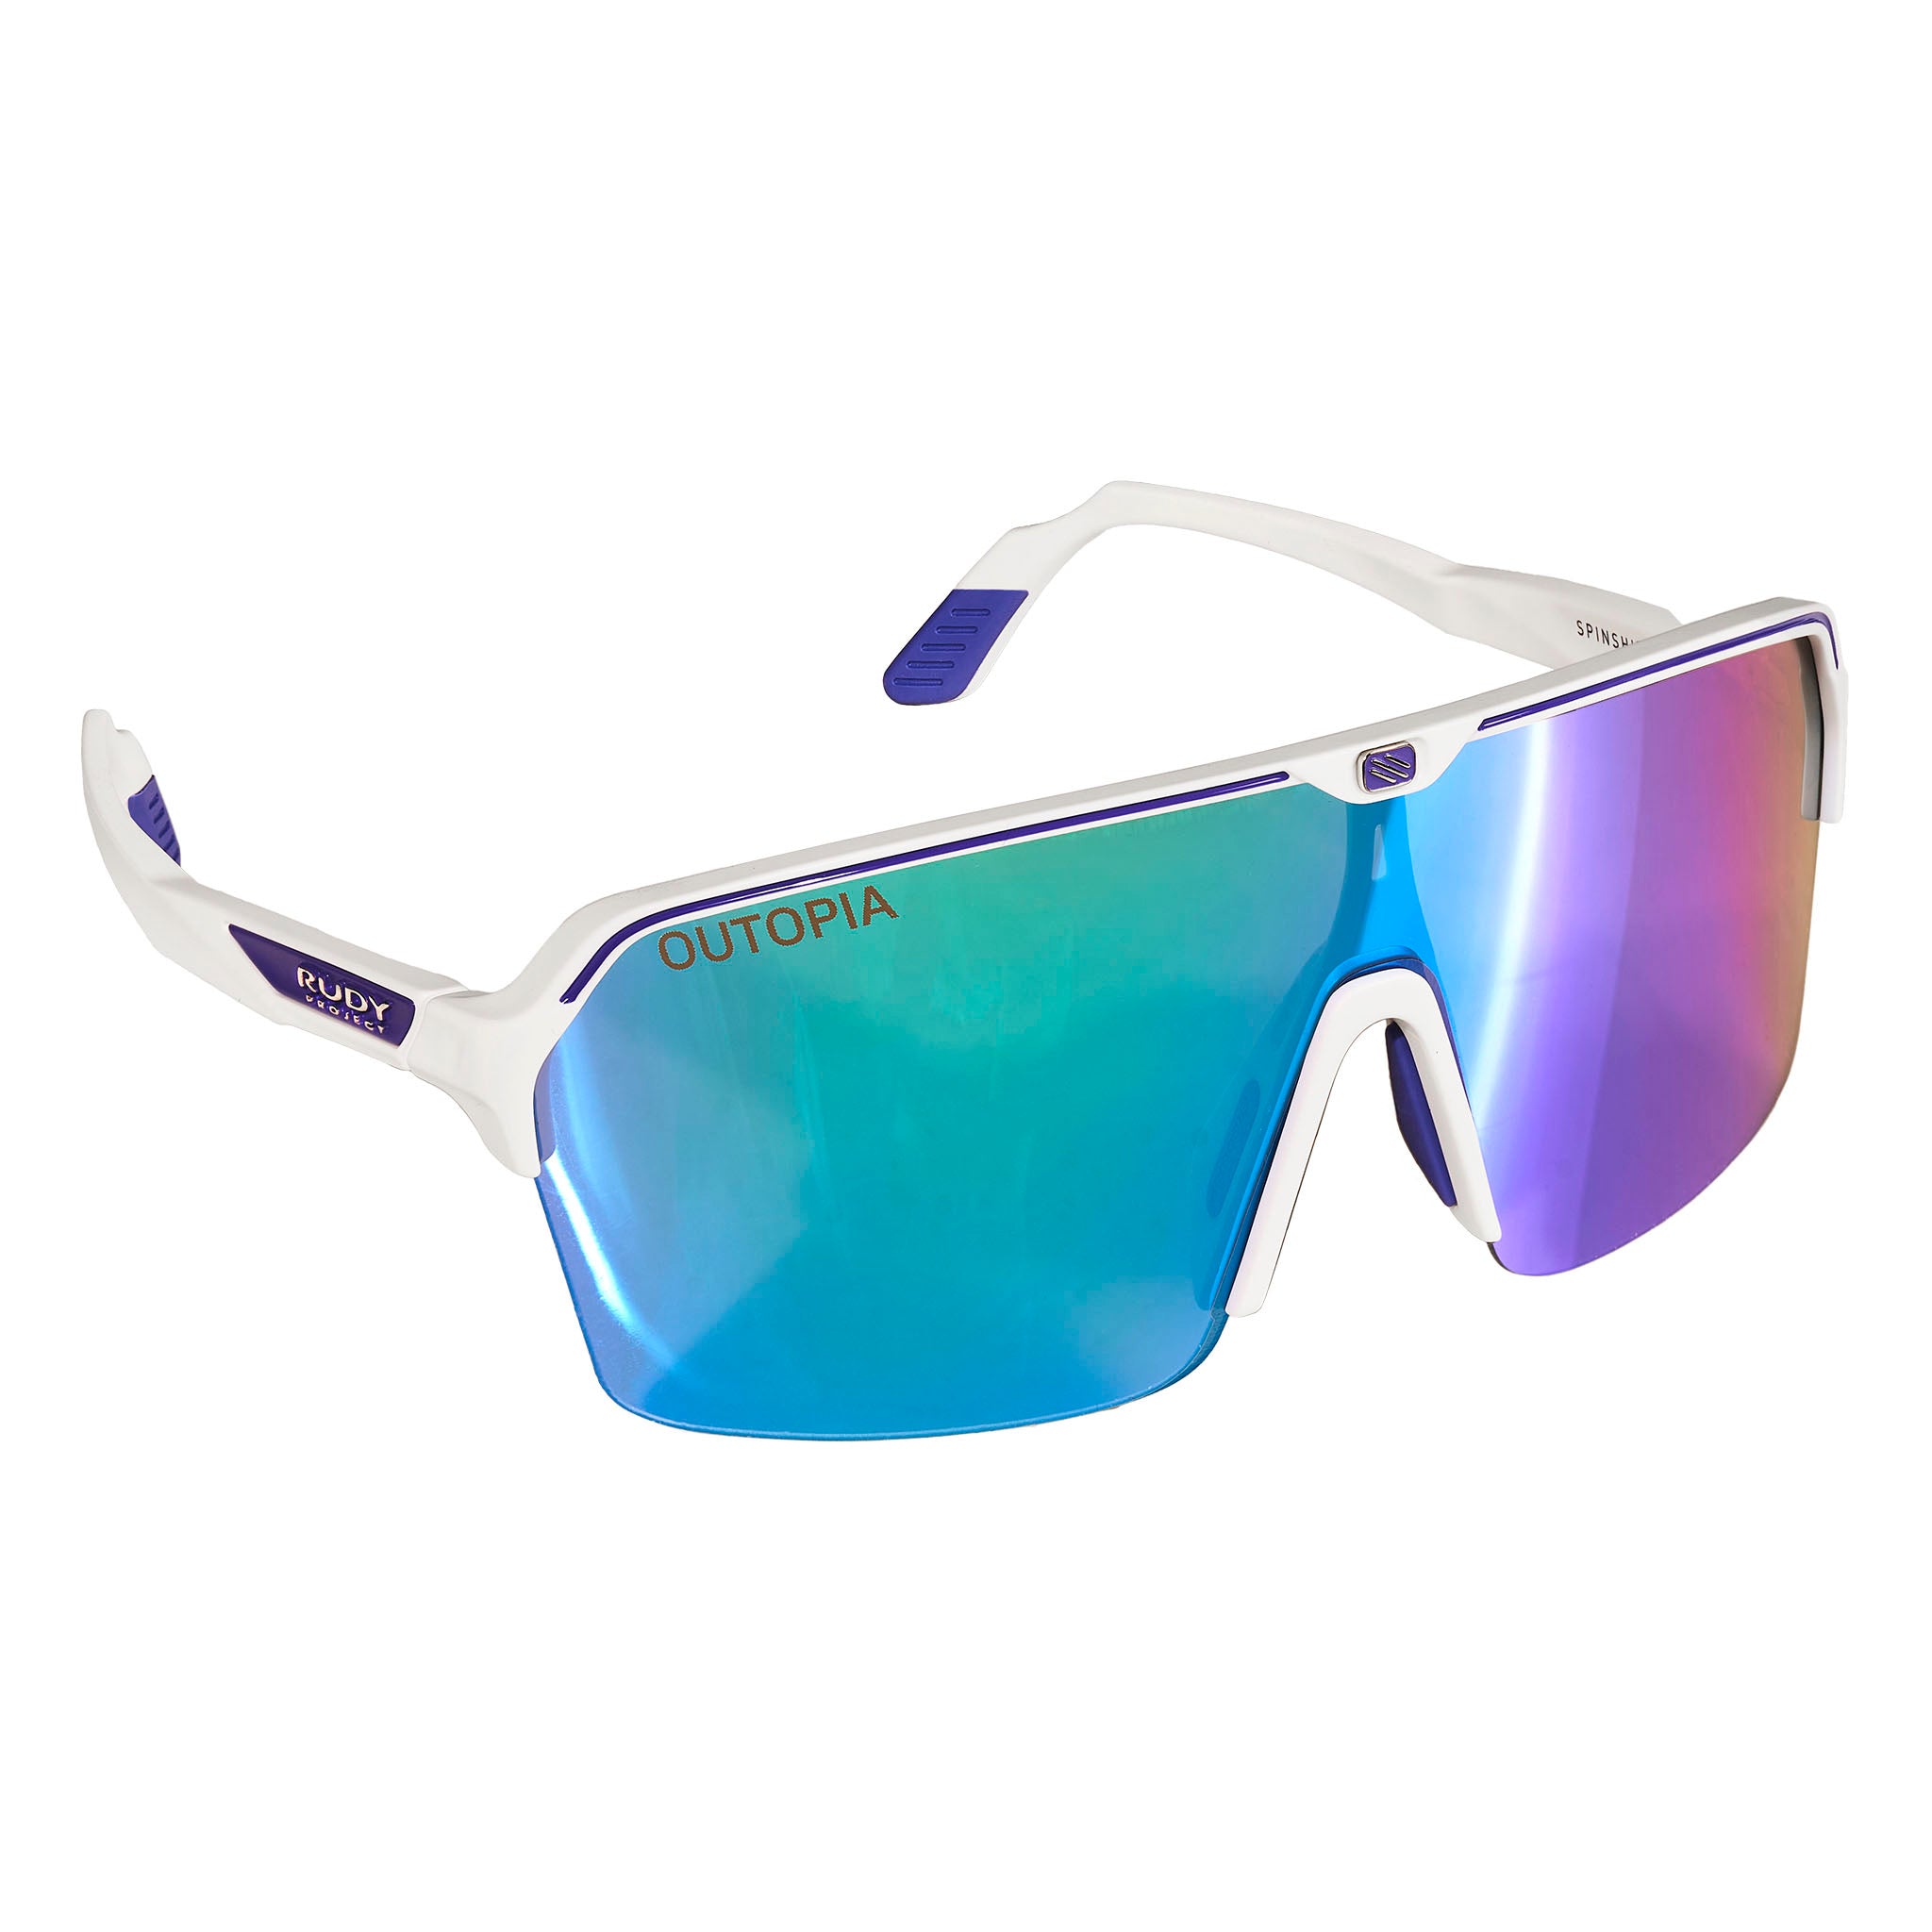 Outopia X Rudy SPINSHIELD AIR Collaborative Sports UV Protection Sunglasses